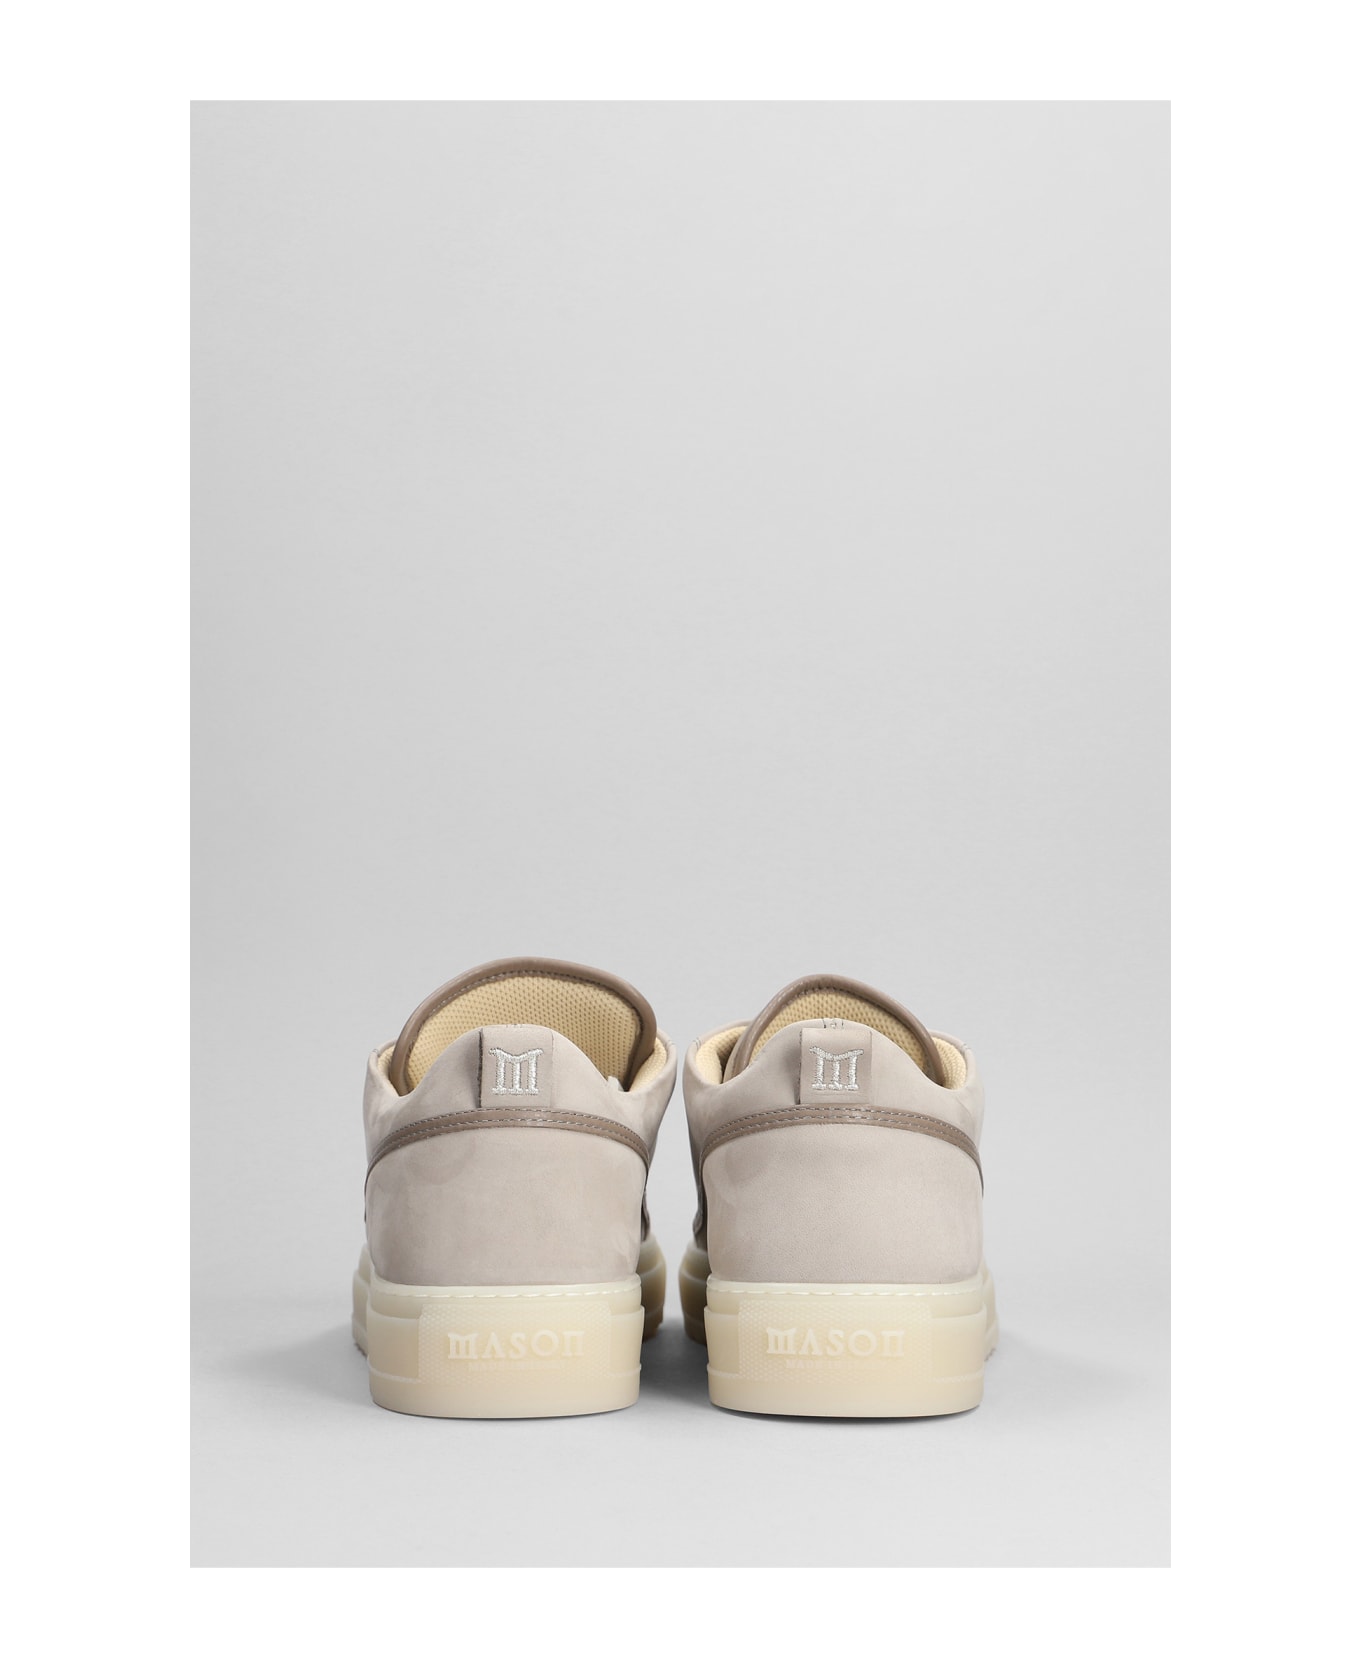 Mason Garments Torino Sneakers In Taupe Leather - taupe スニーカー